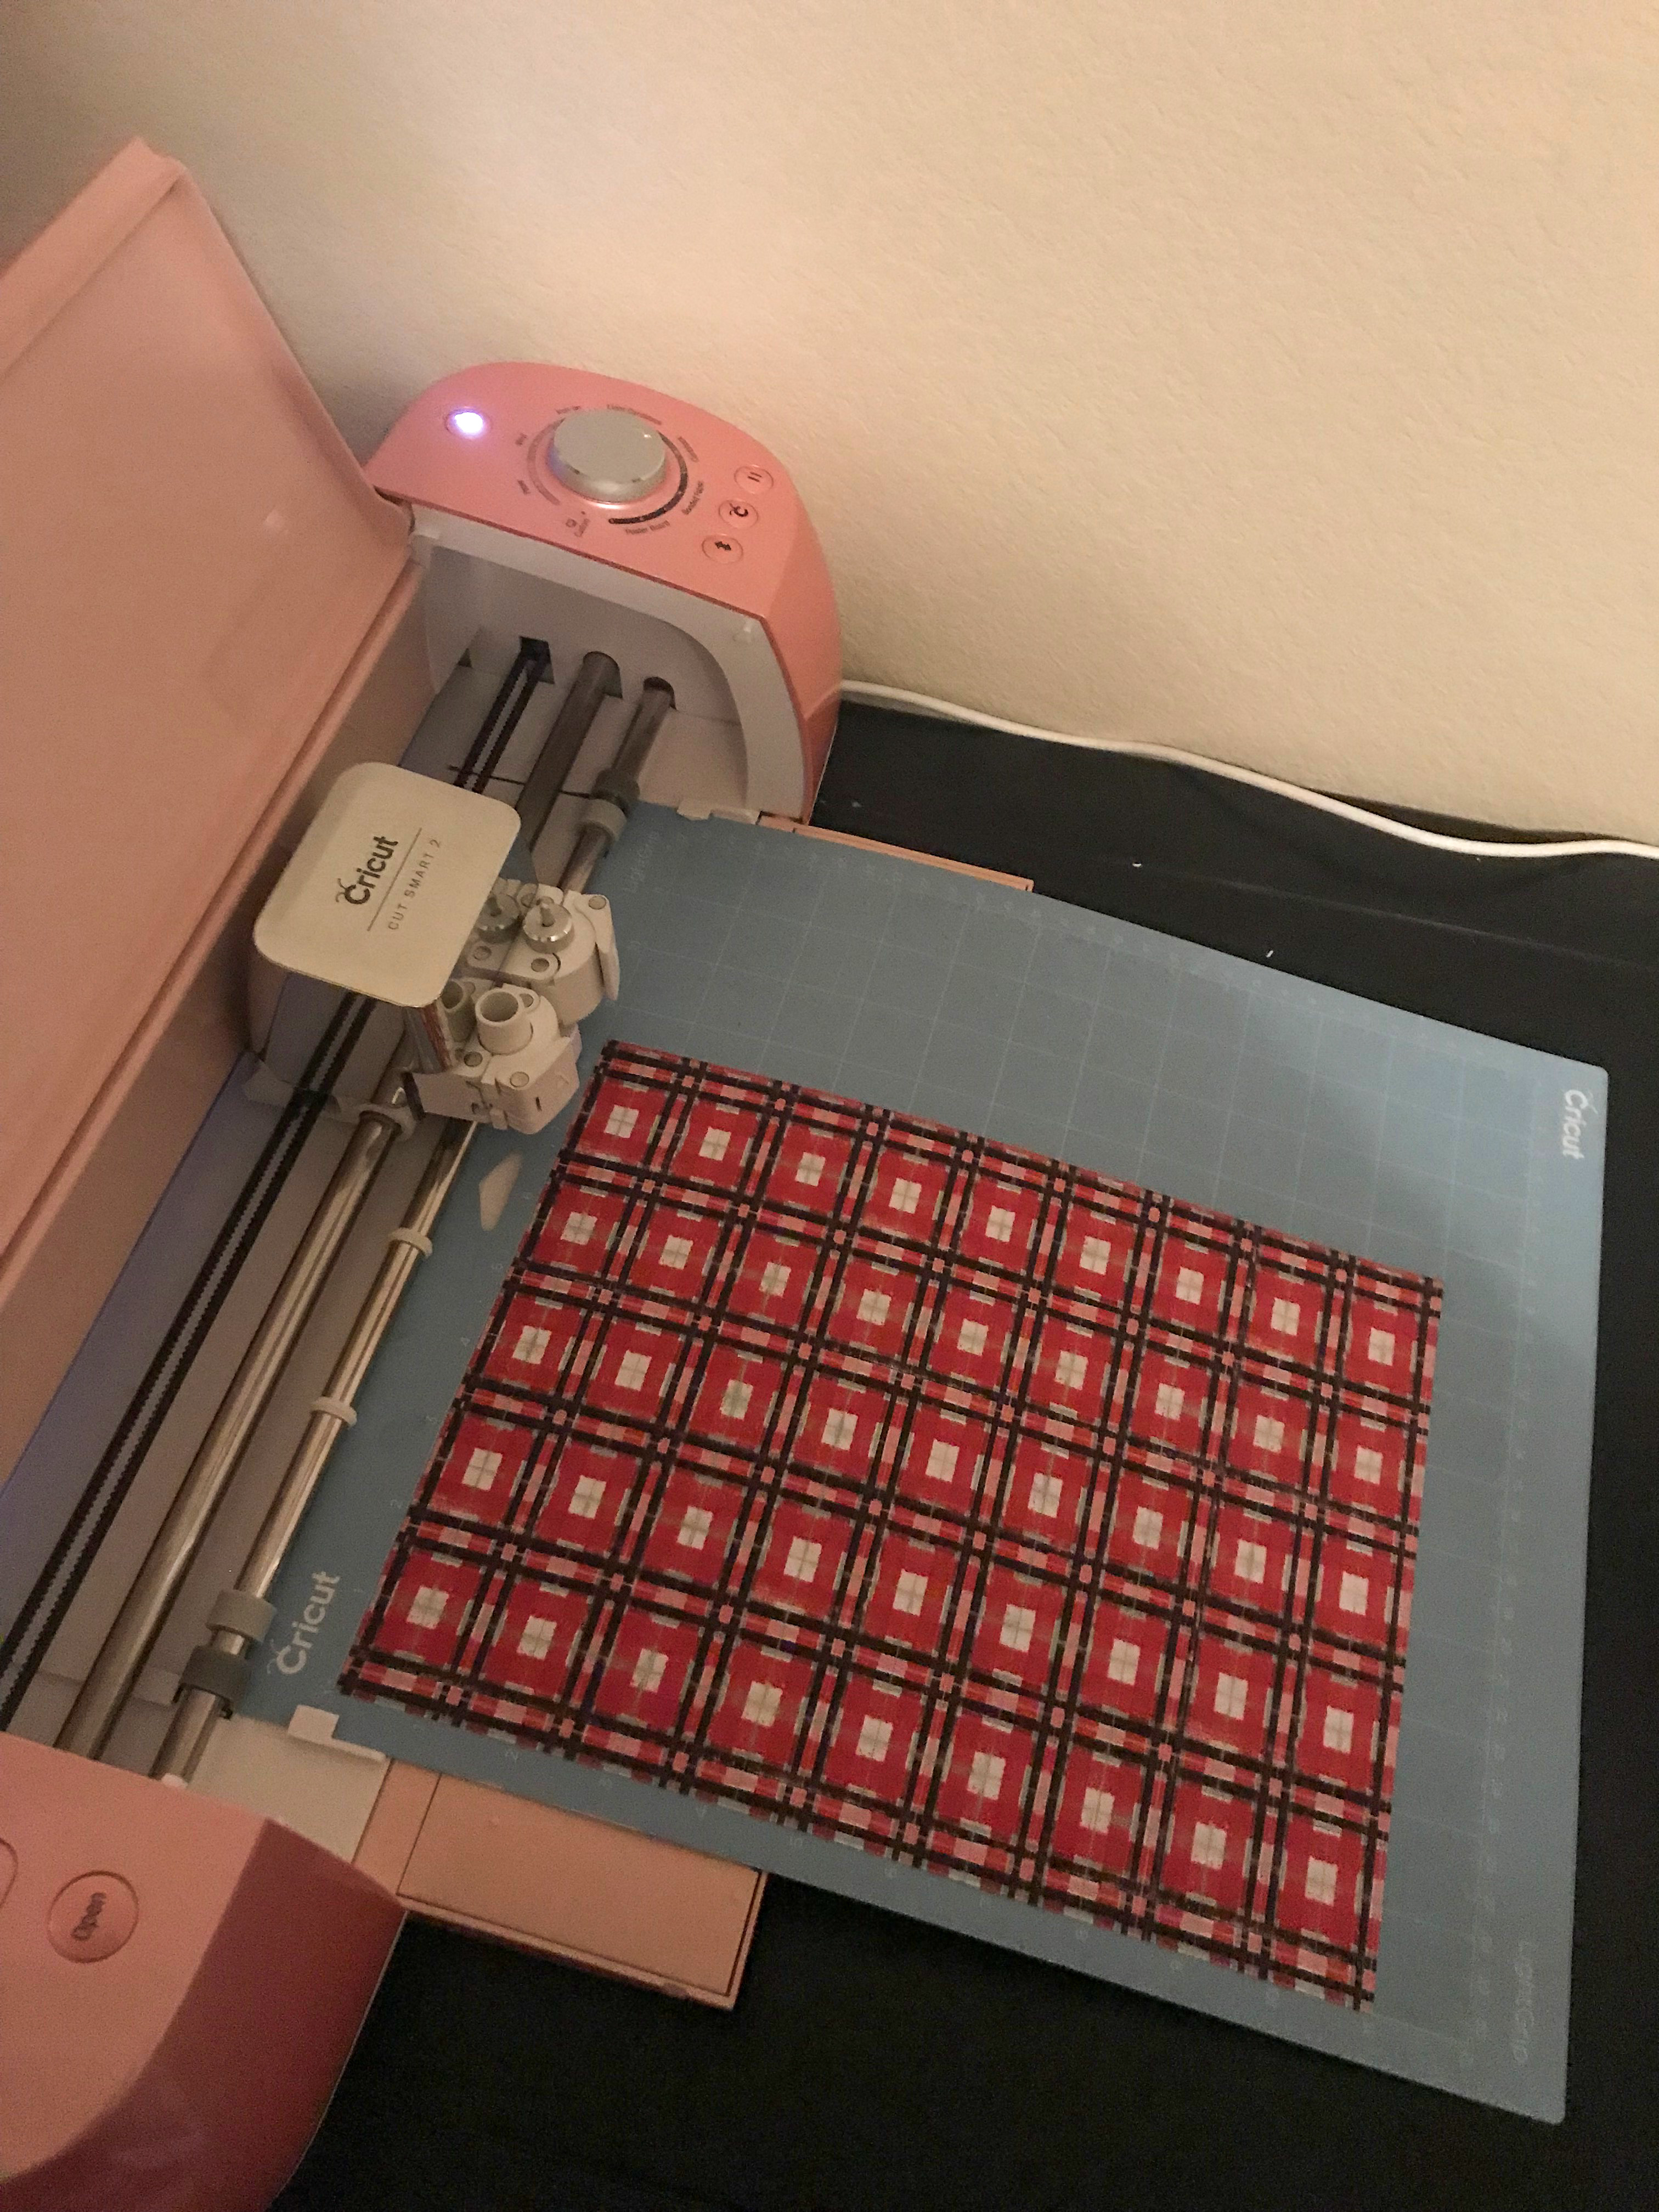 Make a picture perfect letter from Santa using your Cricut. #Cricut